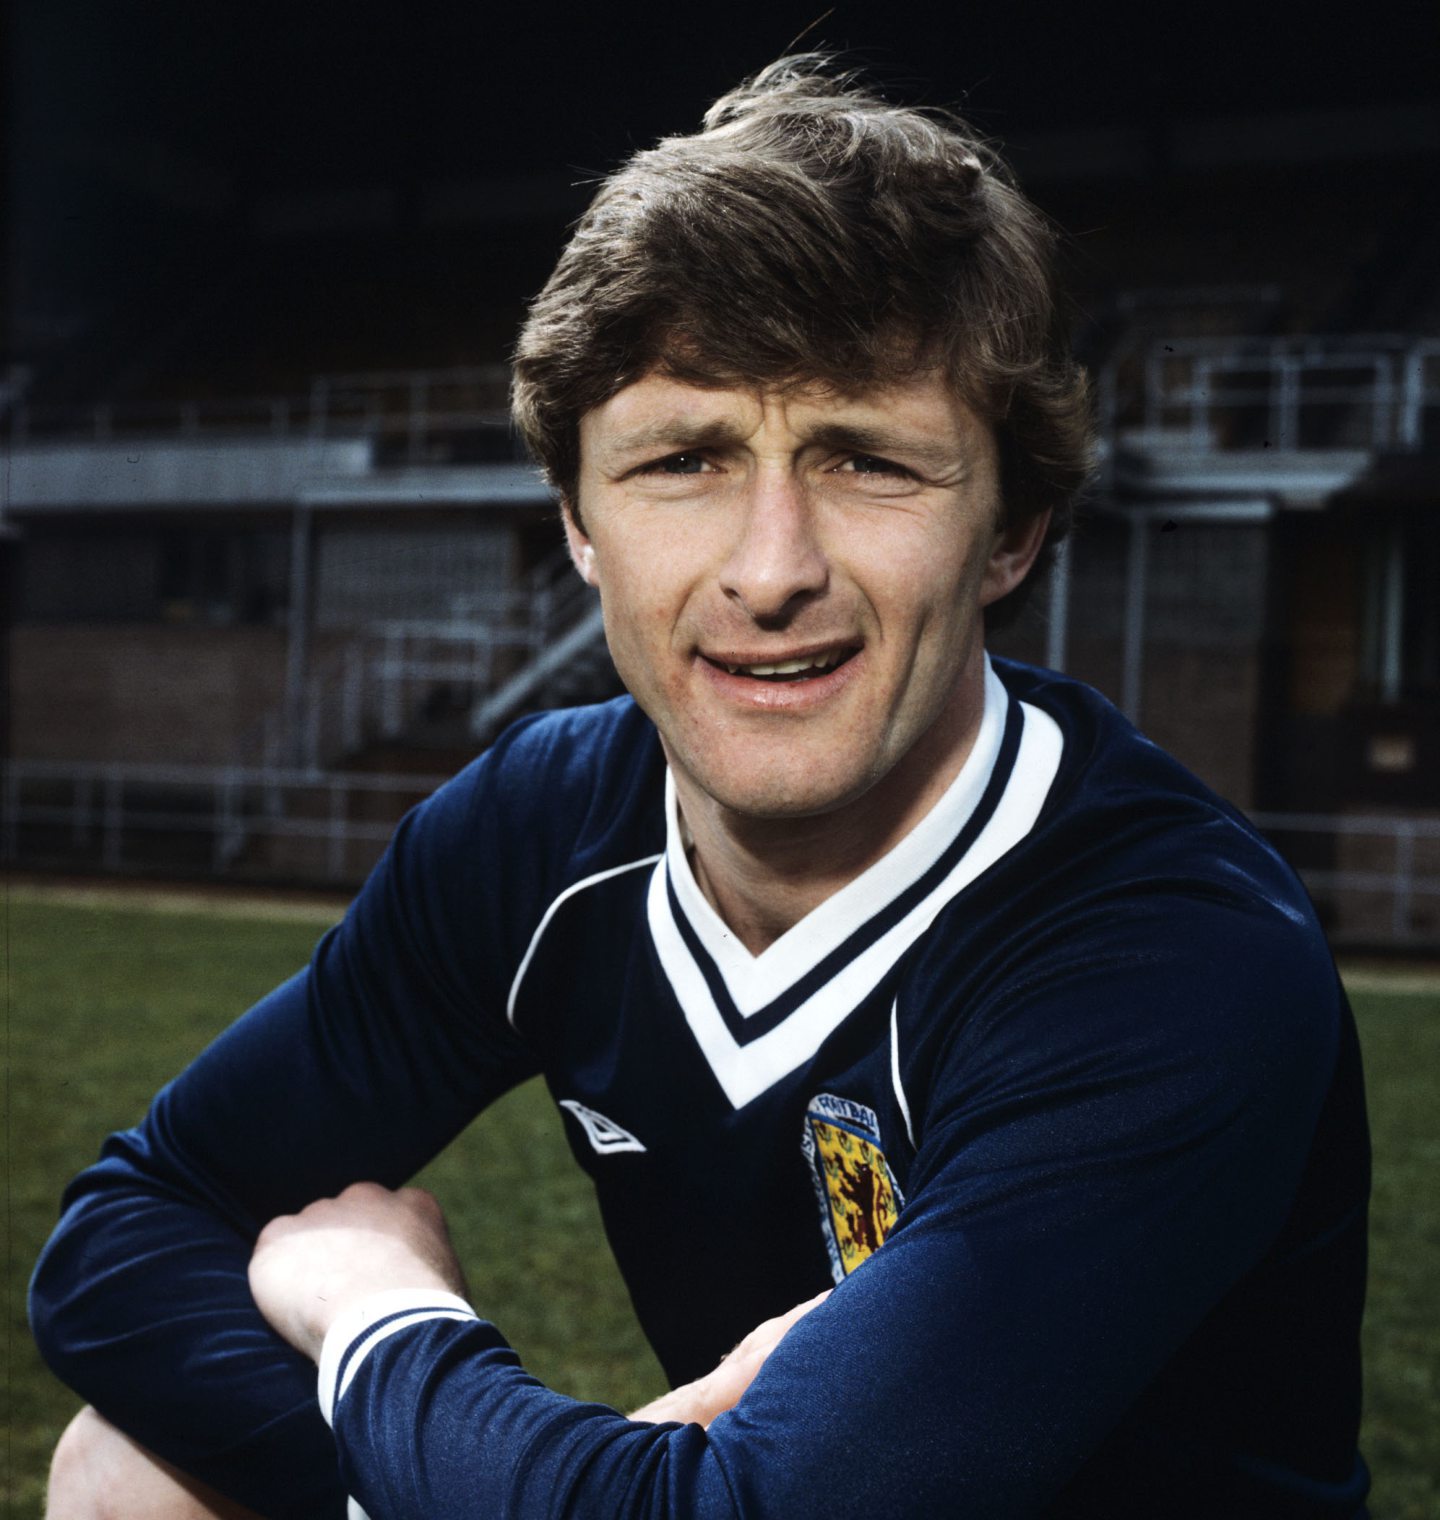 Paul Hegarty won eight caps for Scotland during his spell at Dundee United. Image: SNS.